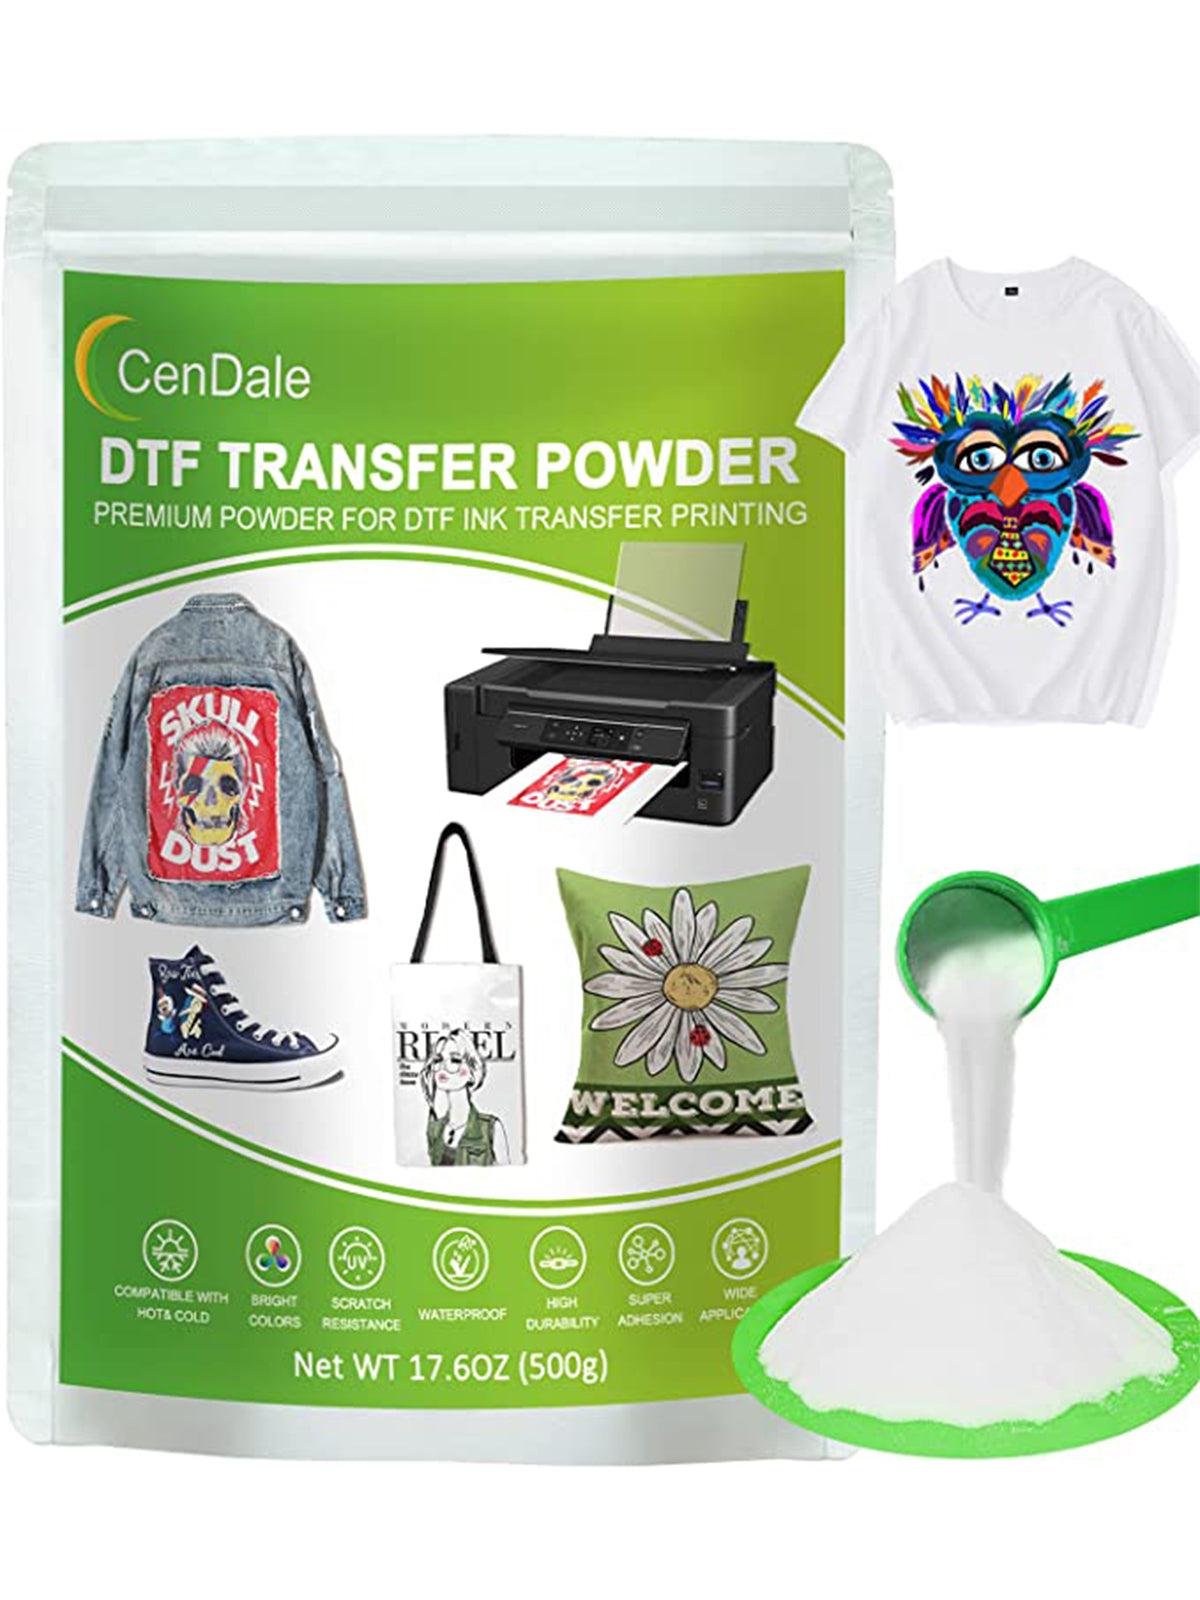 CenDale DTF Transfer Film and Powder Kit - 30 Sheets A4 DTF Film for Sublimation, 14oz White Medium DTF Powder, Direct-to-Film Transfer for Any